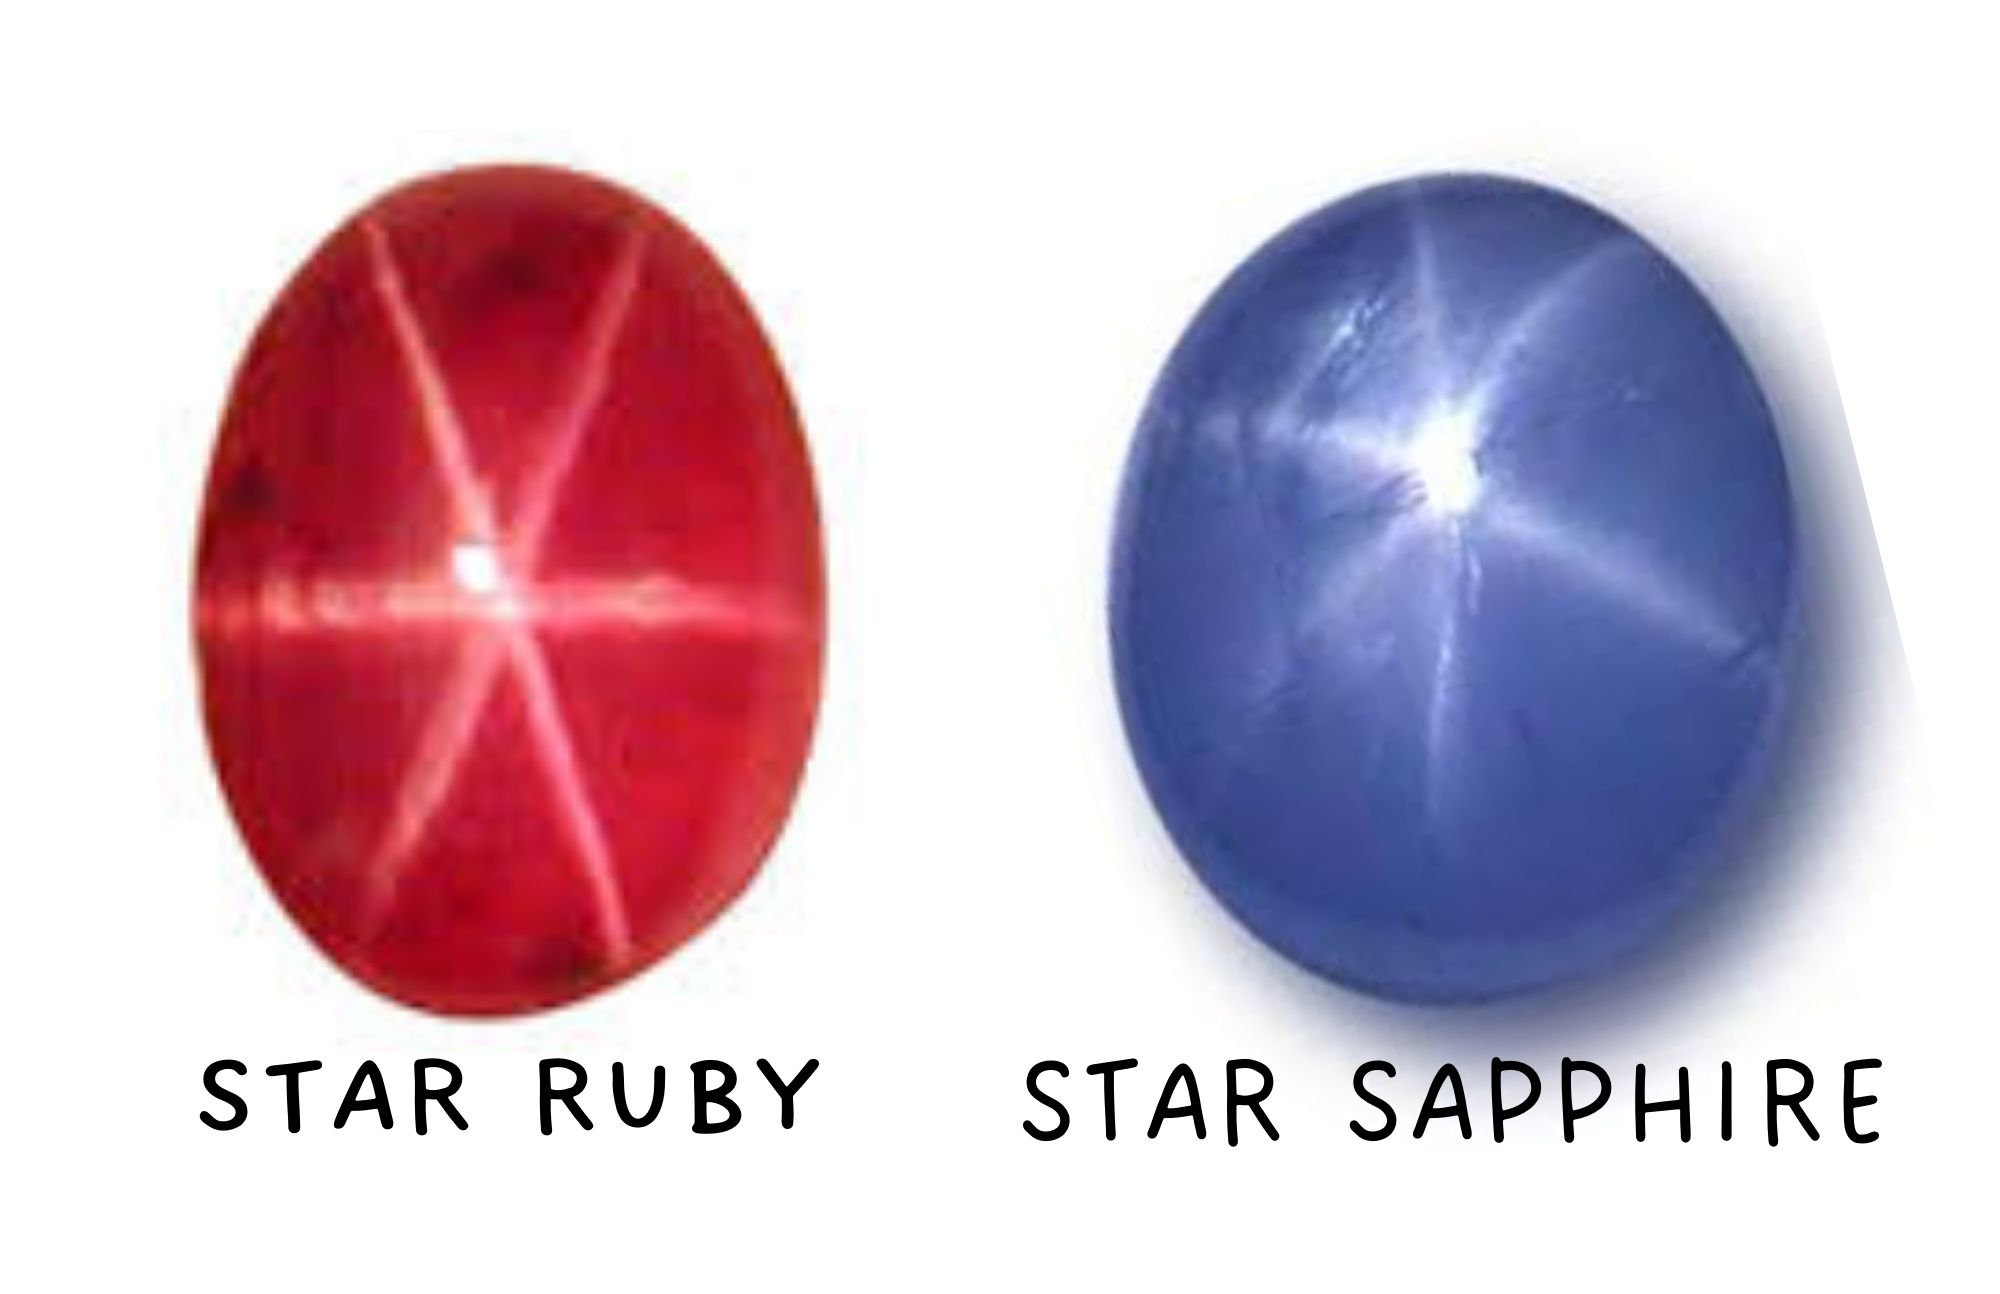 Pink-Red star ruby in the left corner and a star sapphire in the right corner